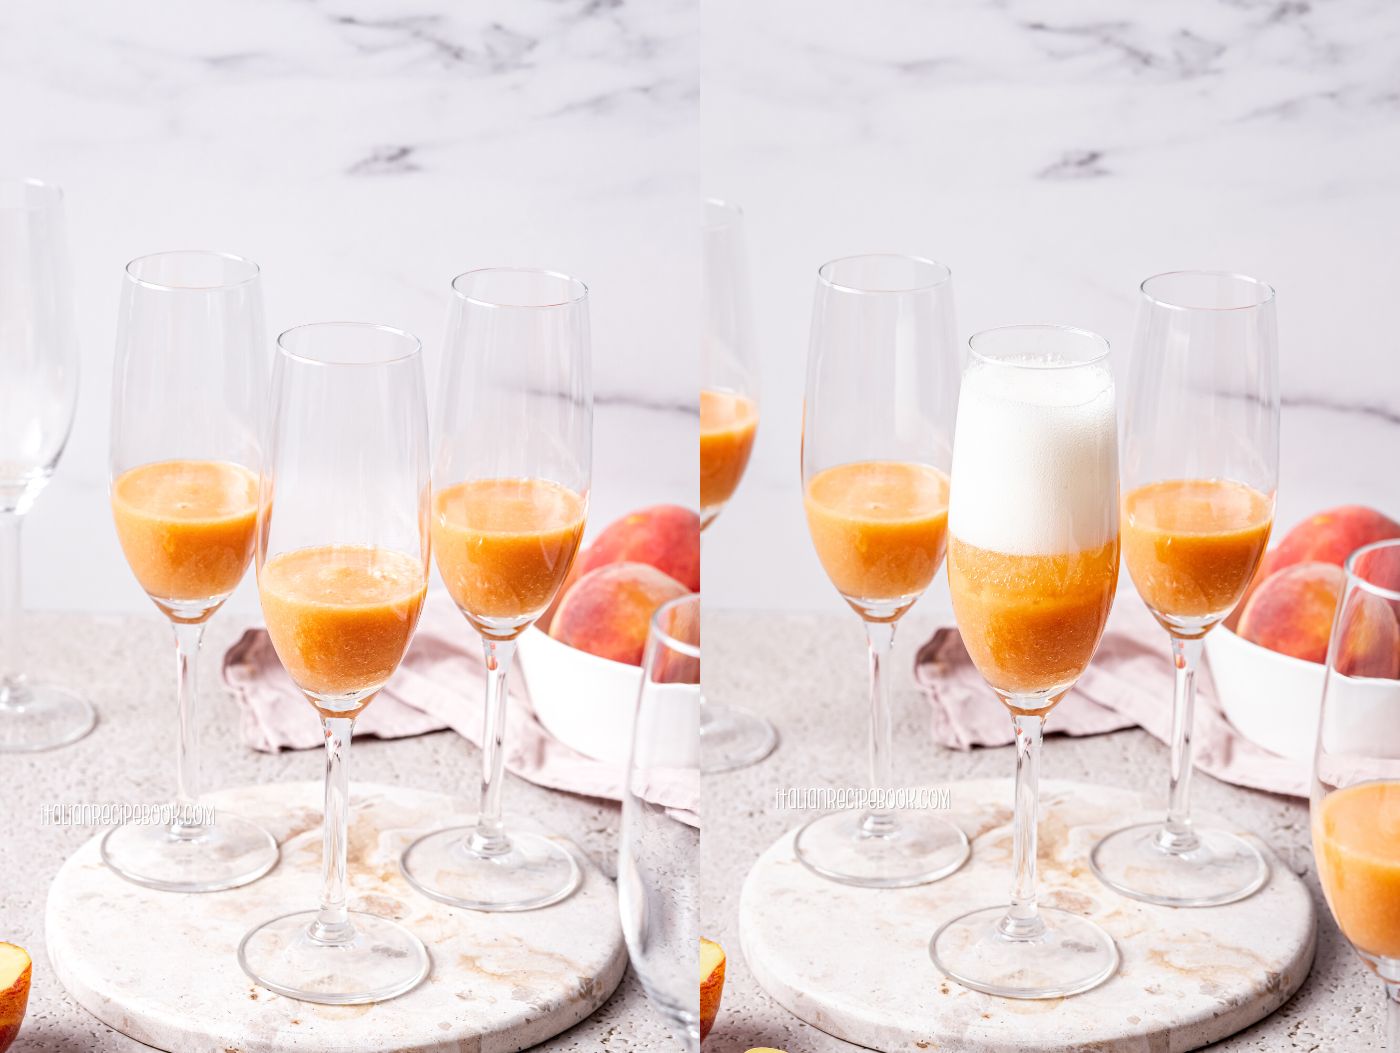 how to make bellini cocktail - fill half through with prosecco